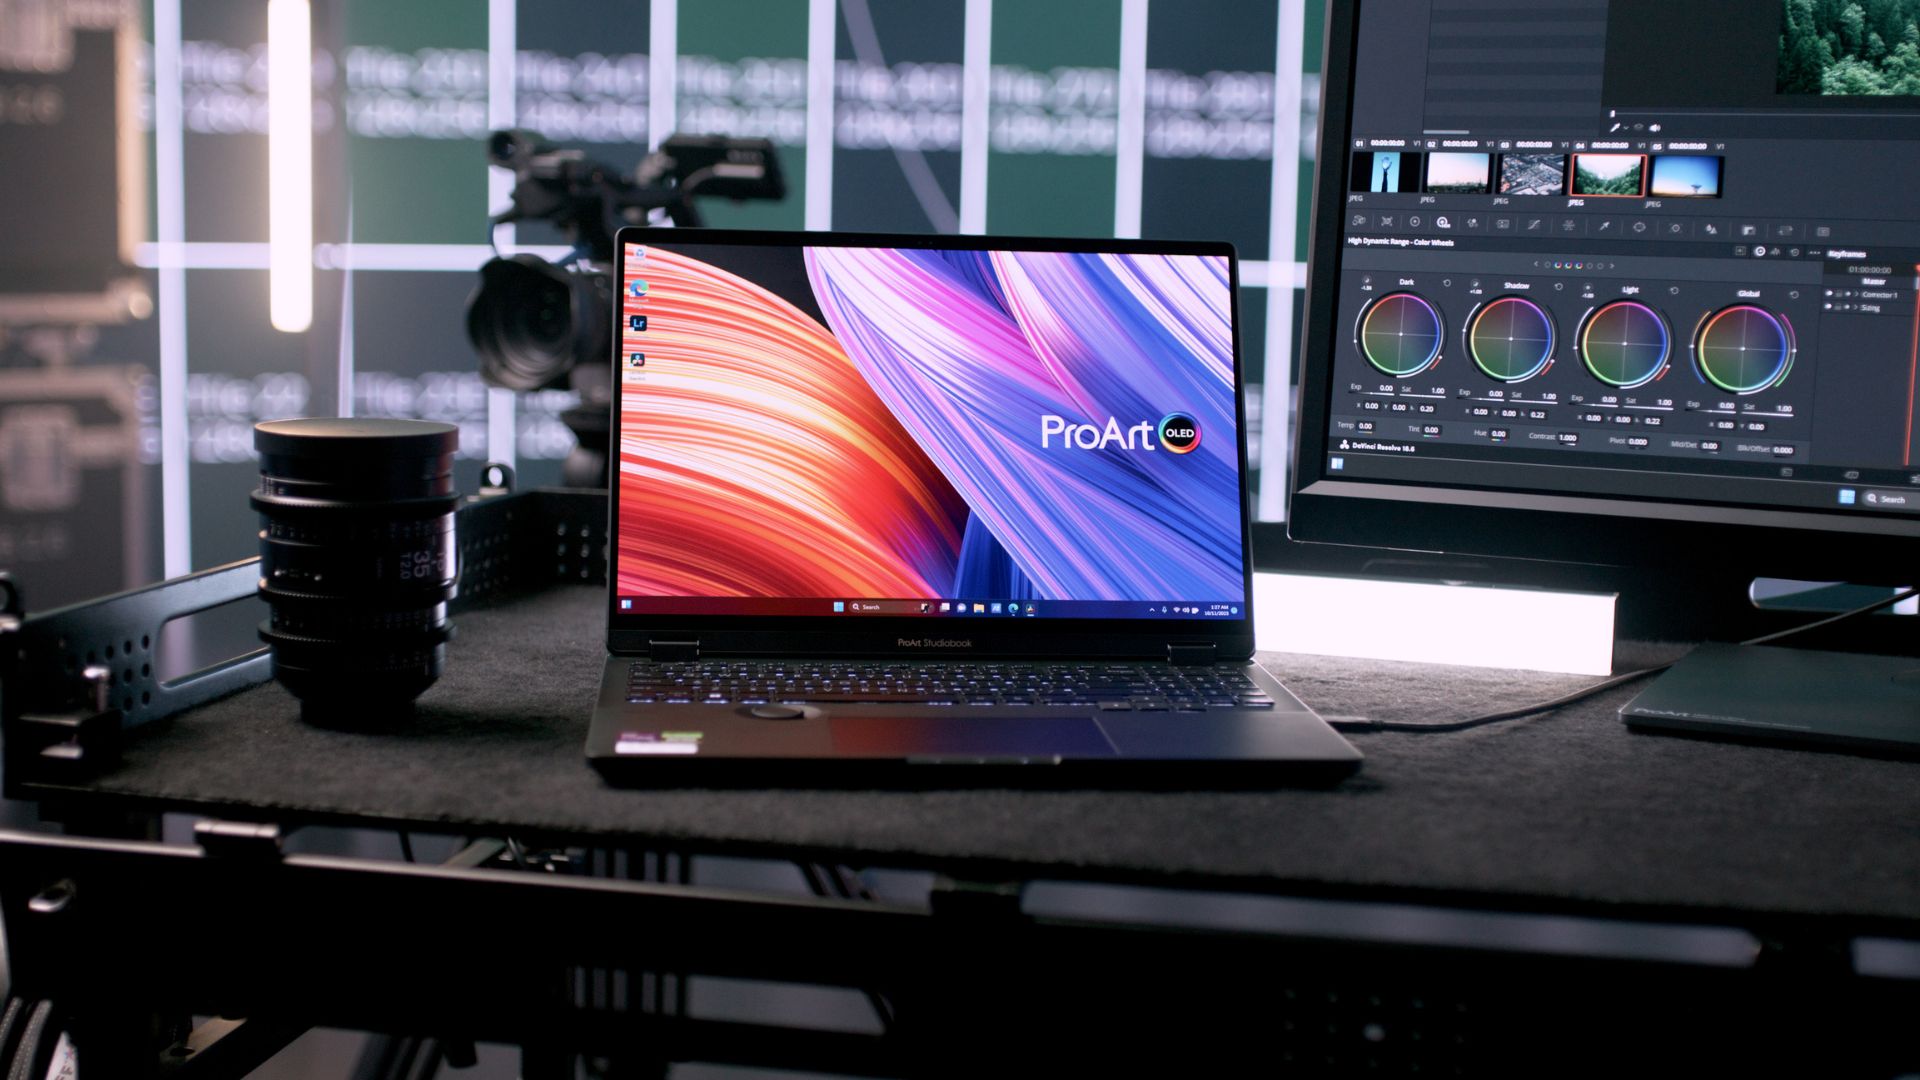 Vū Technologies using ASUS ProArt as part of its productions